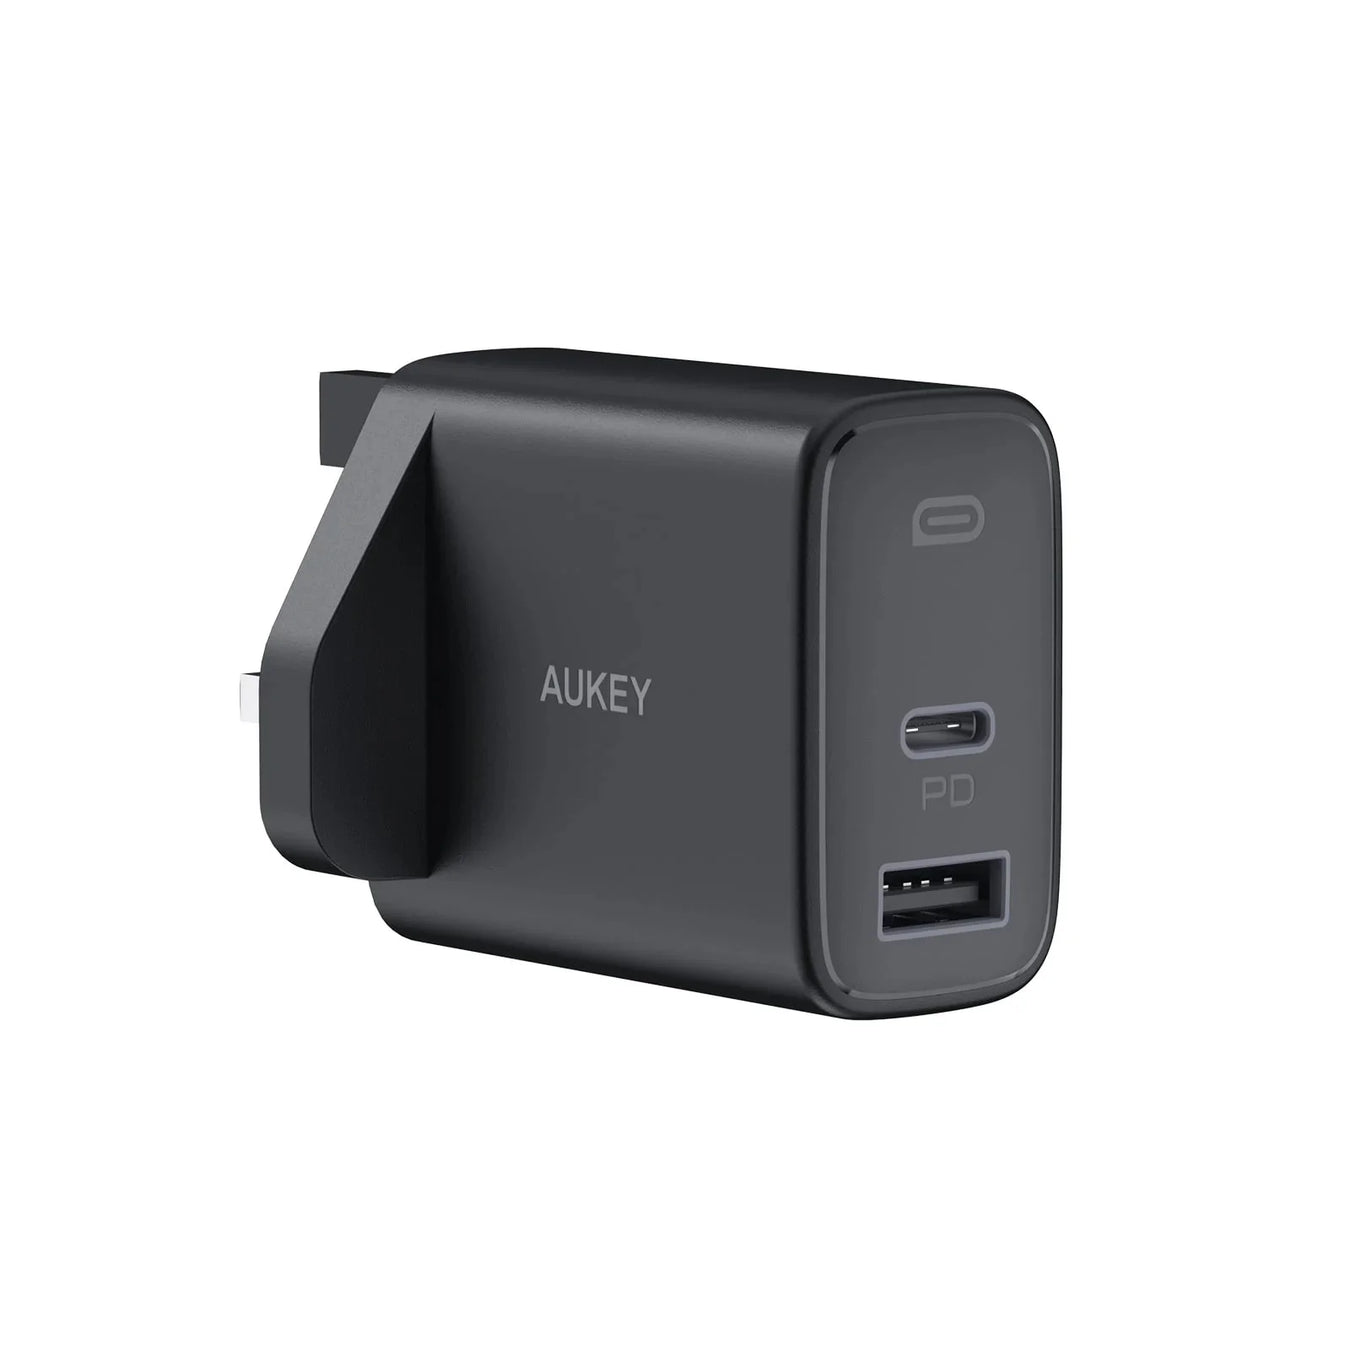 Aukey's Wall Chargers